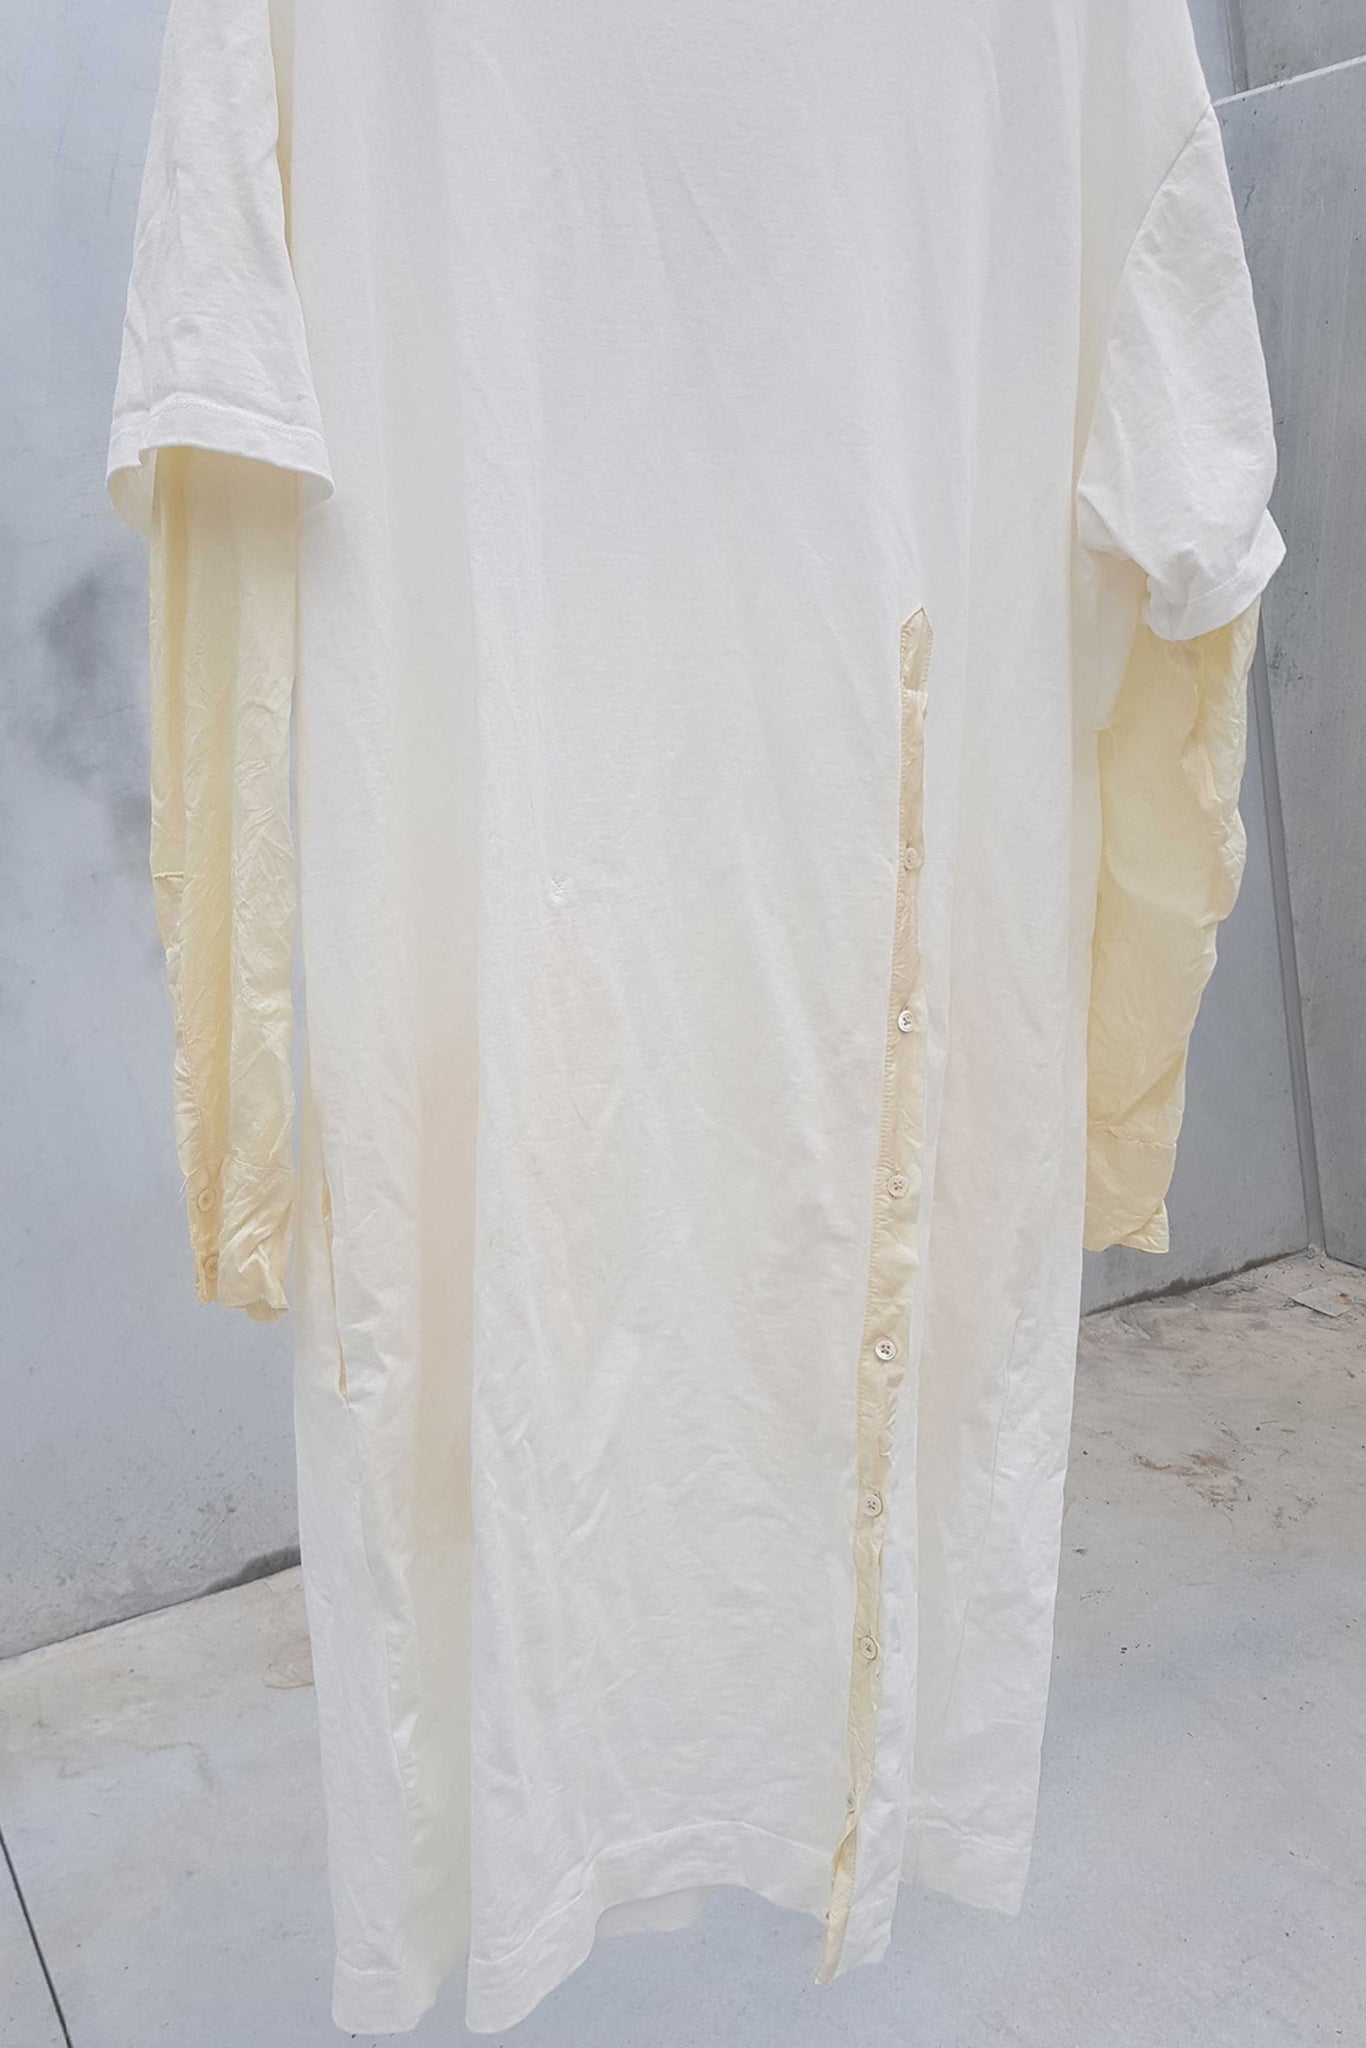 T-Shirt Dress with Arms | Japanese Cotton + Vintage Silk